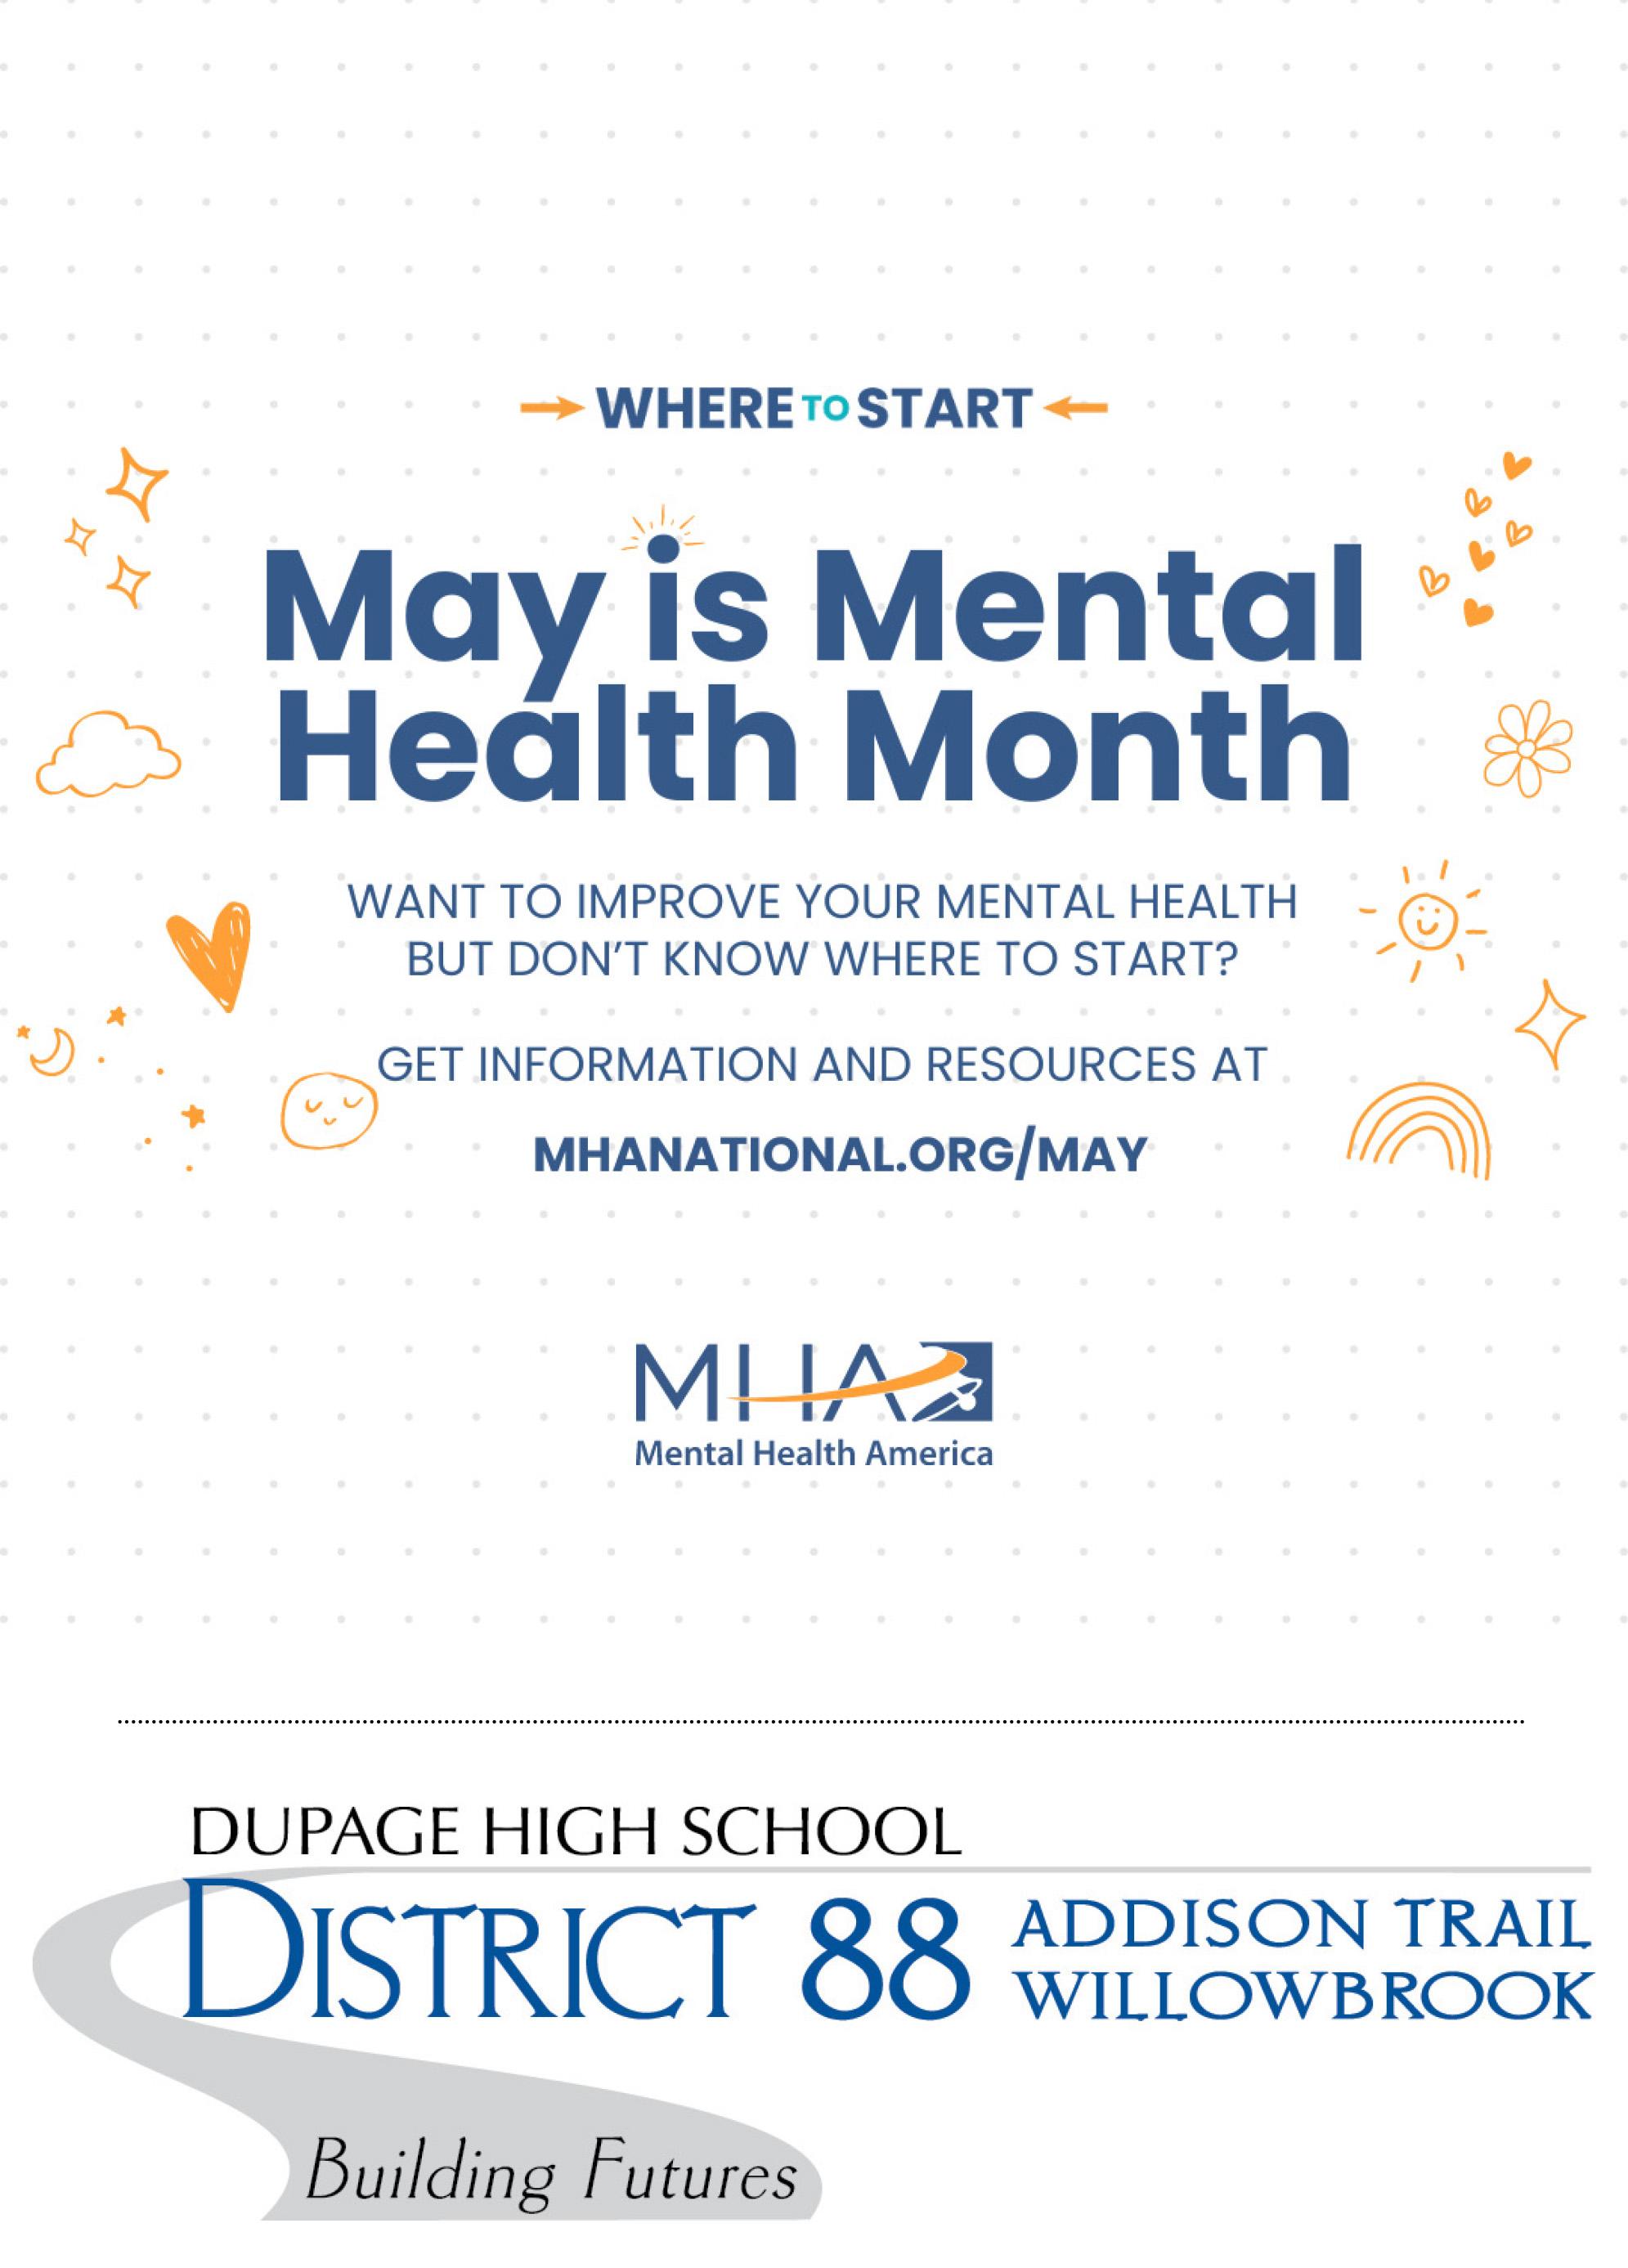 District 88 recognizes Mental Health Month